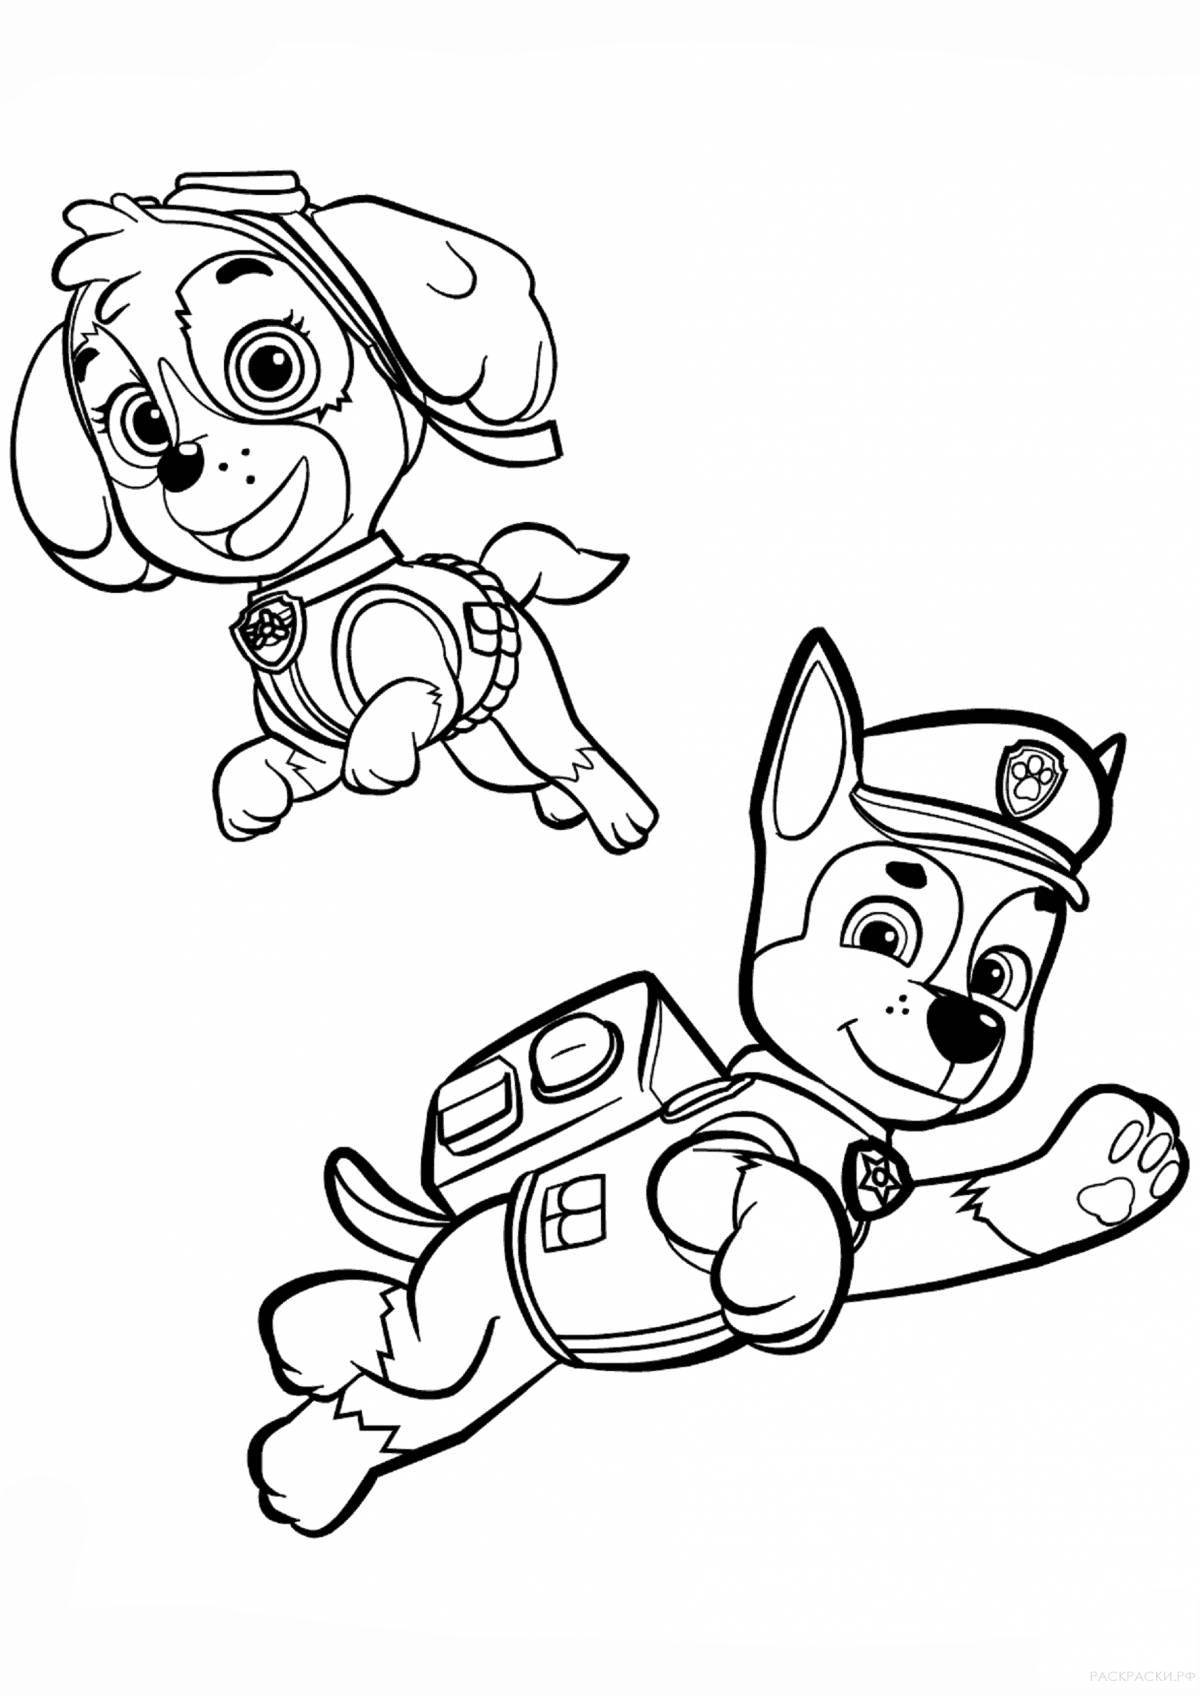 Coloring page brave racer for kids